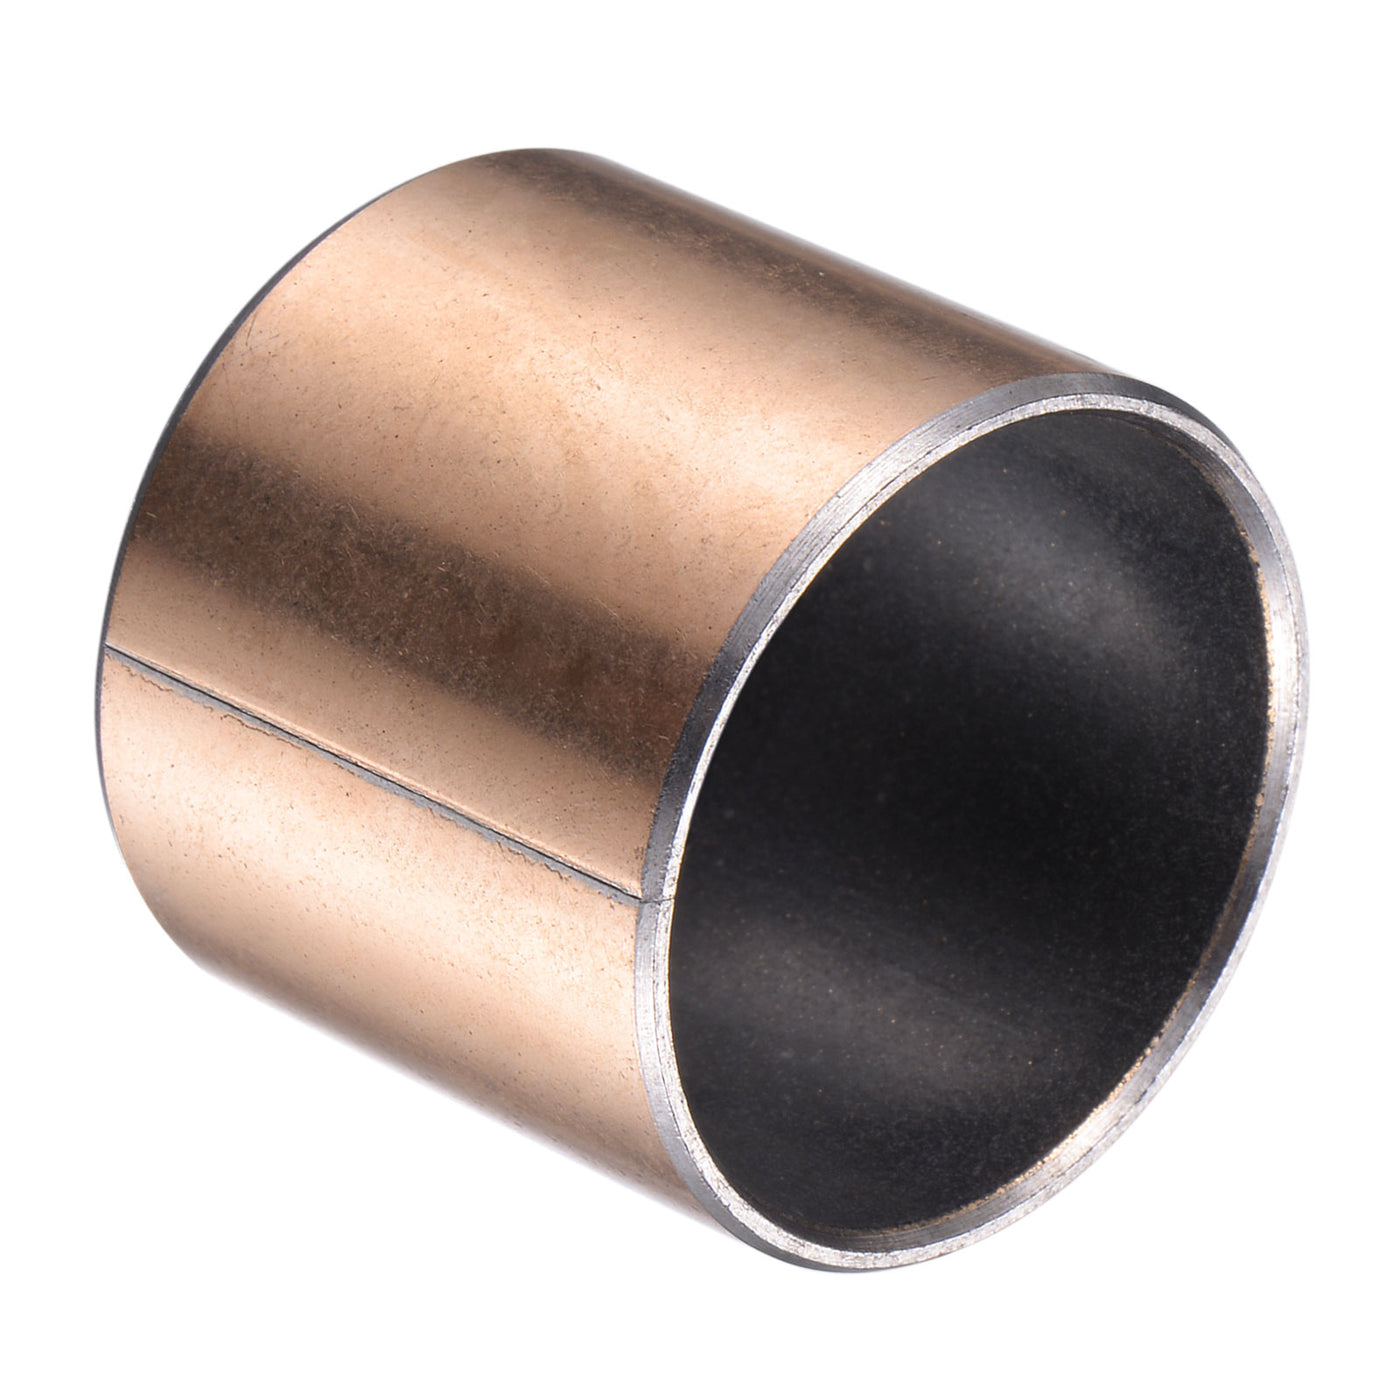 uxcell Uxcell Sleeve Bearings Plain Bearings Wrapped Oilless Bushing